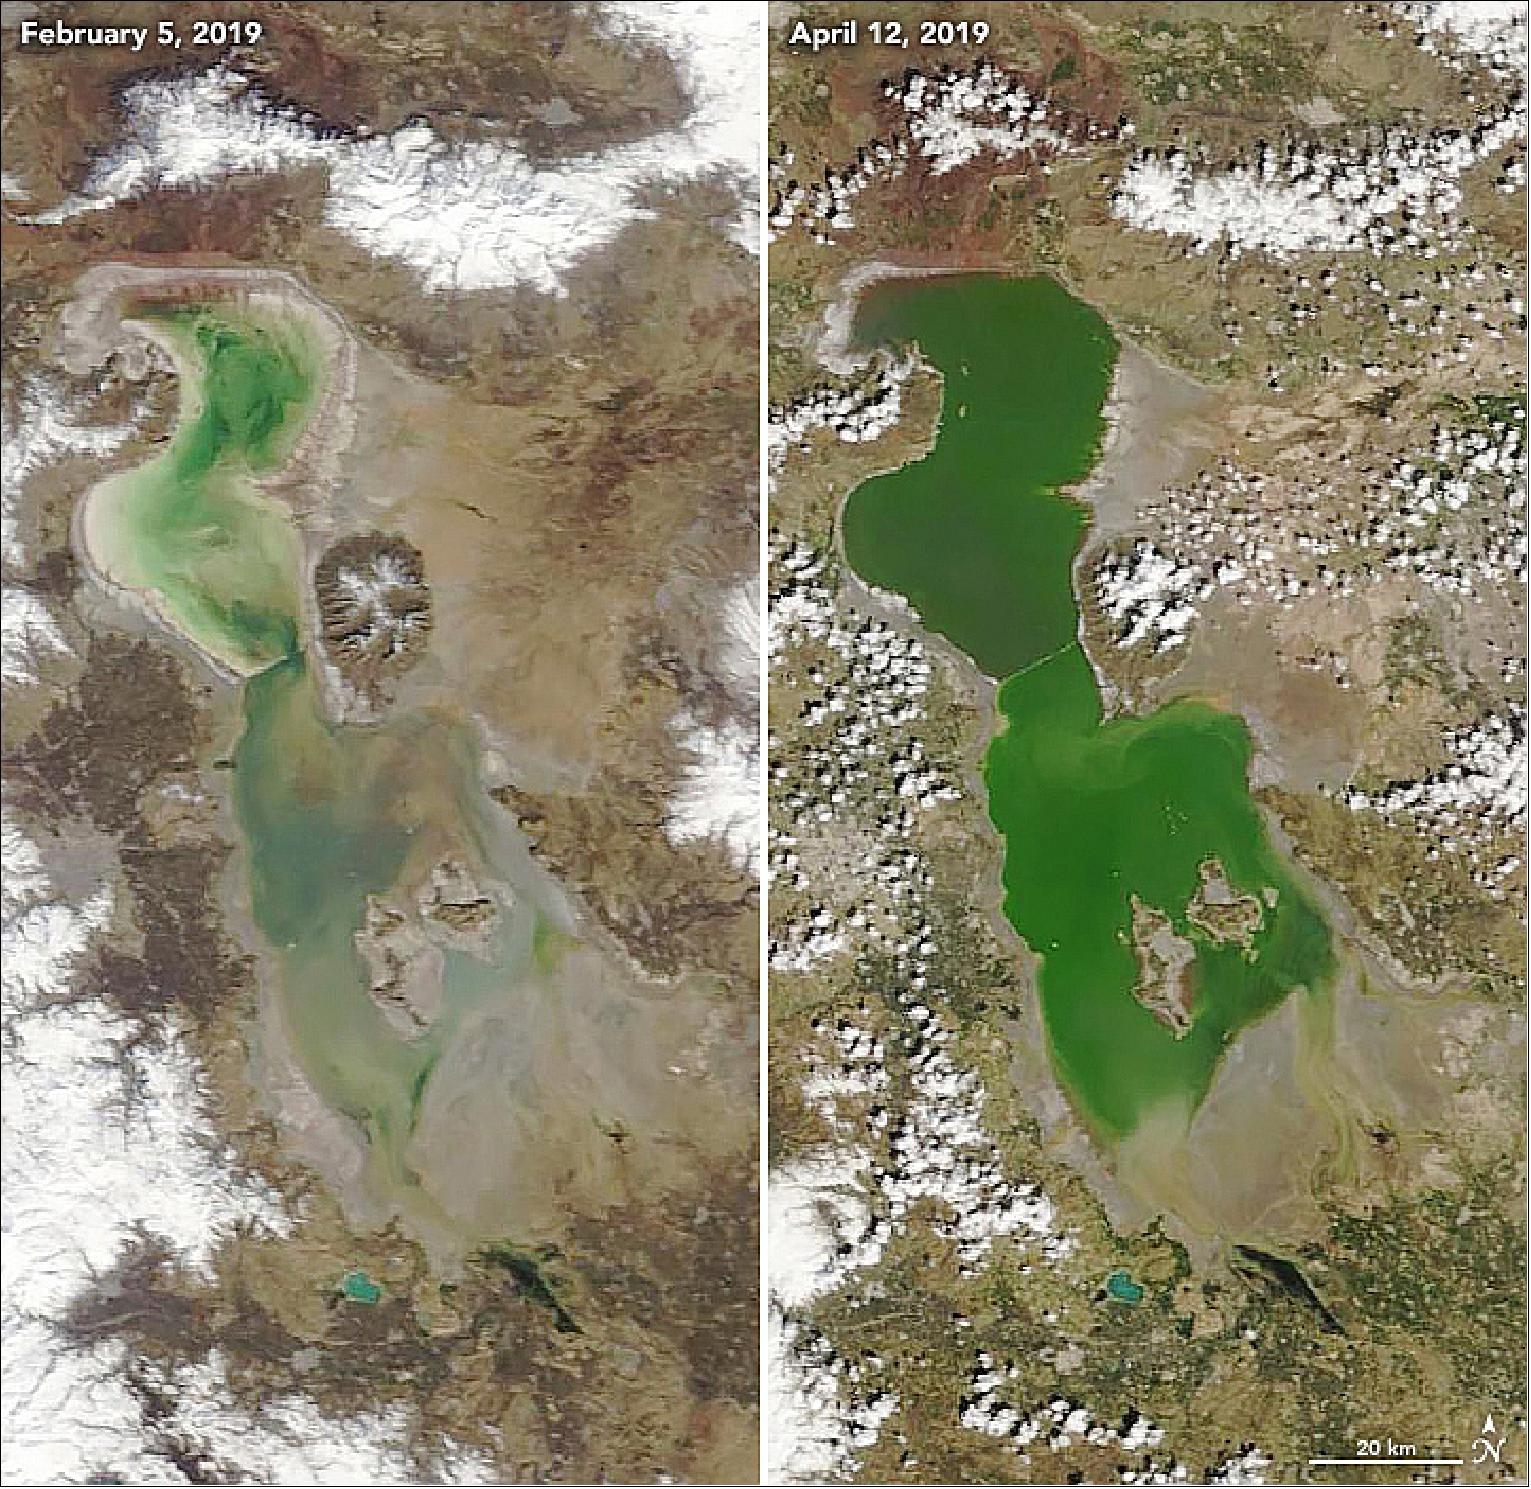 Figure 39: These images, acquired by Terra MODIS, show Lake Urmia (also Orumiyeh or Orumieh) on 5 February, 2019, and 12 April 12 2019, before and after the recent floods in the region. The rains were reported to be the heaviest Iran has seen in 50 years. After the spring rains, the depth of the lake increased by 62 cm (24 inches) compared to the spring of 2018 (image credit: NASA Earth Observatory, images by Lauren Dauphin, using MODIS data from NASA EOSDIS/LANCE and GIBS/Worldview. Story by Kasha Patel)